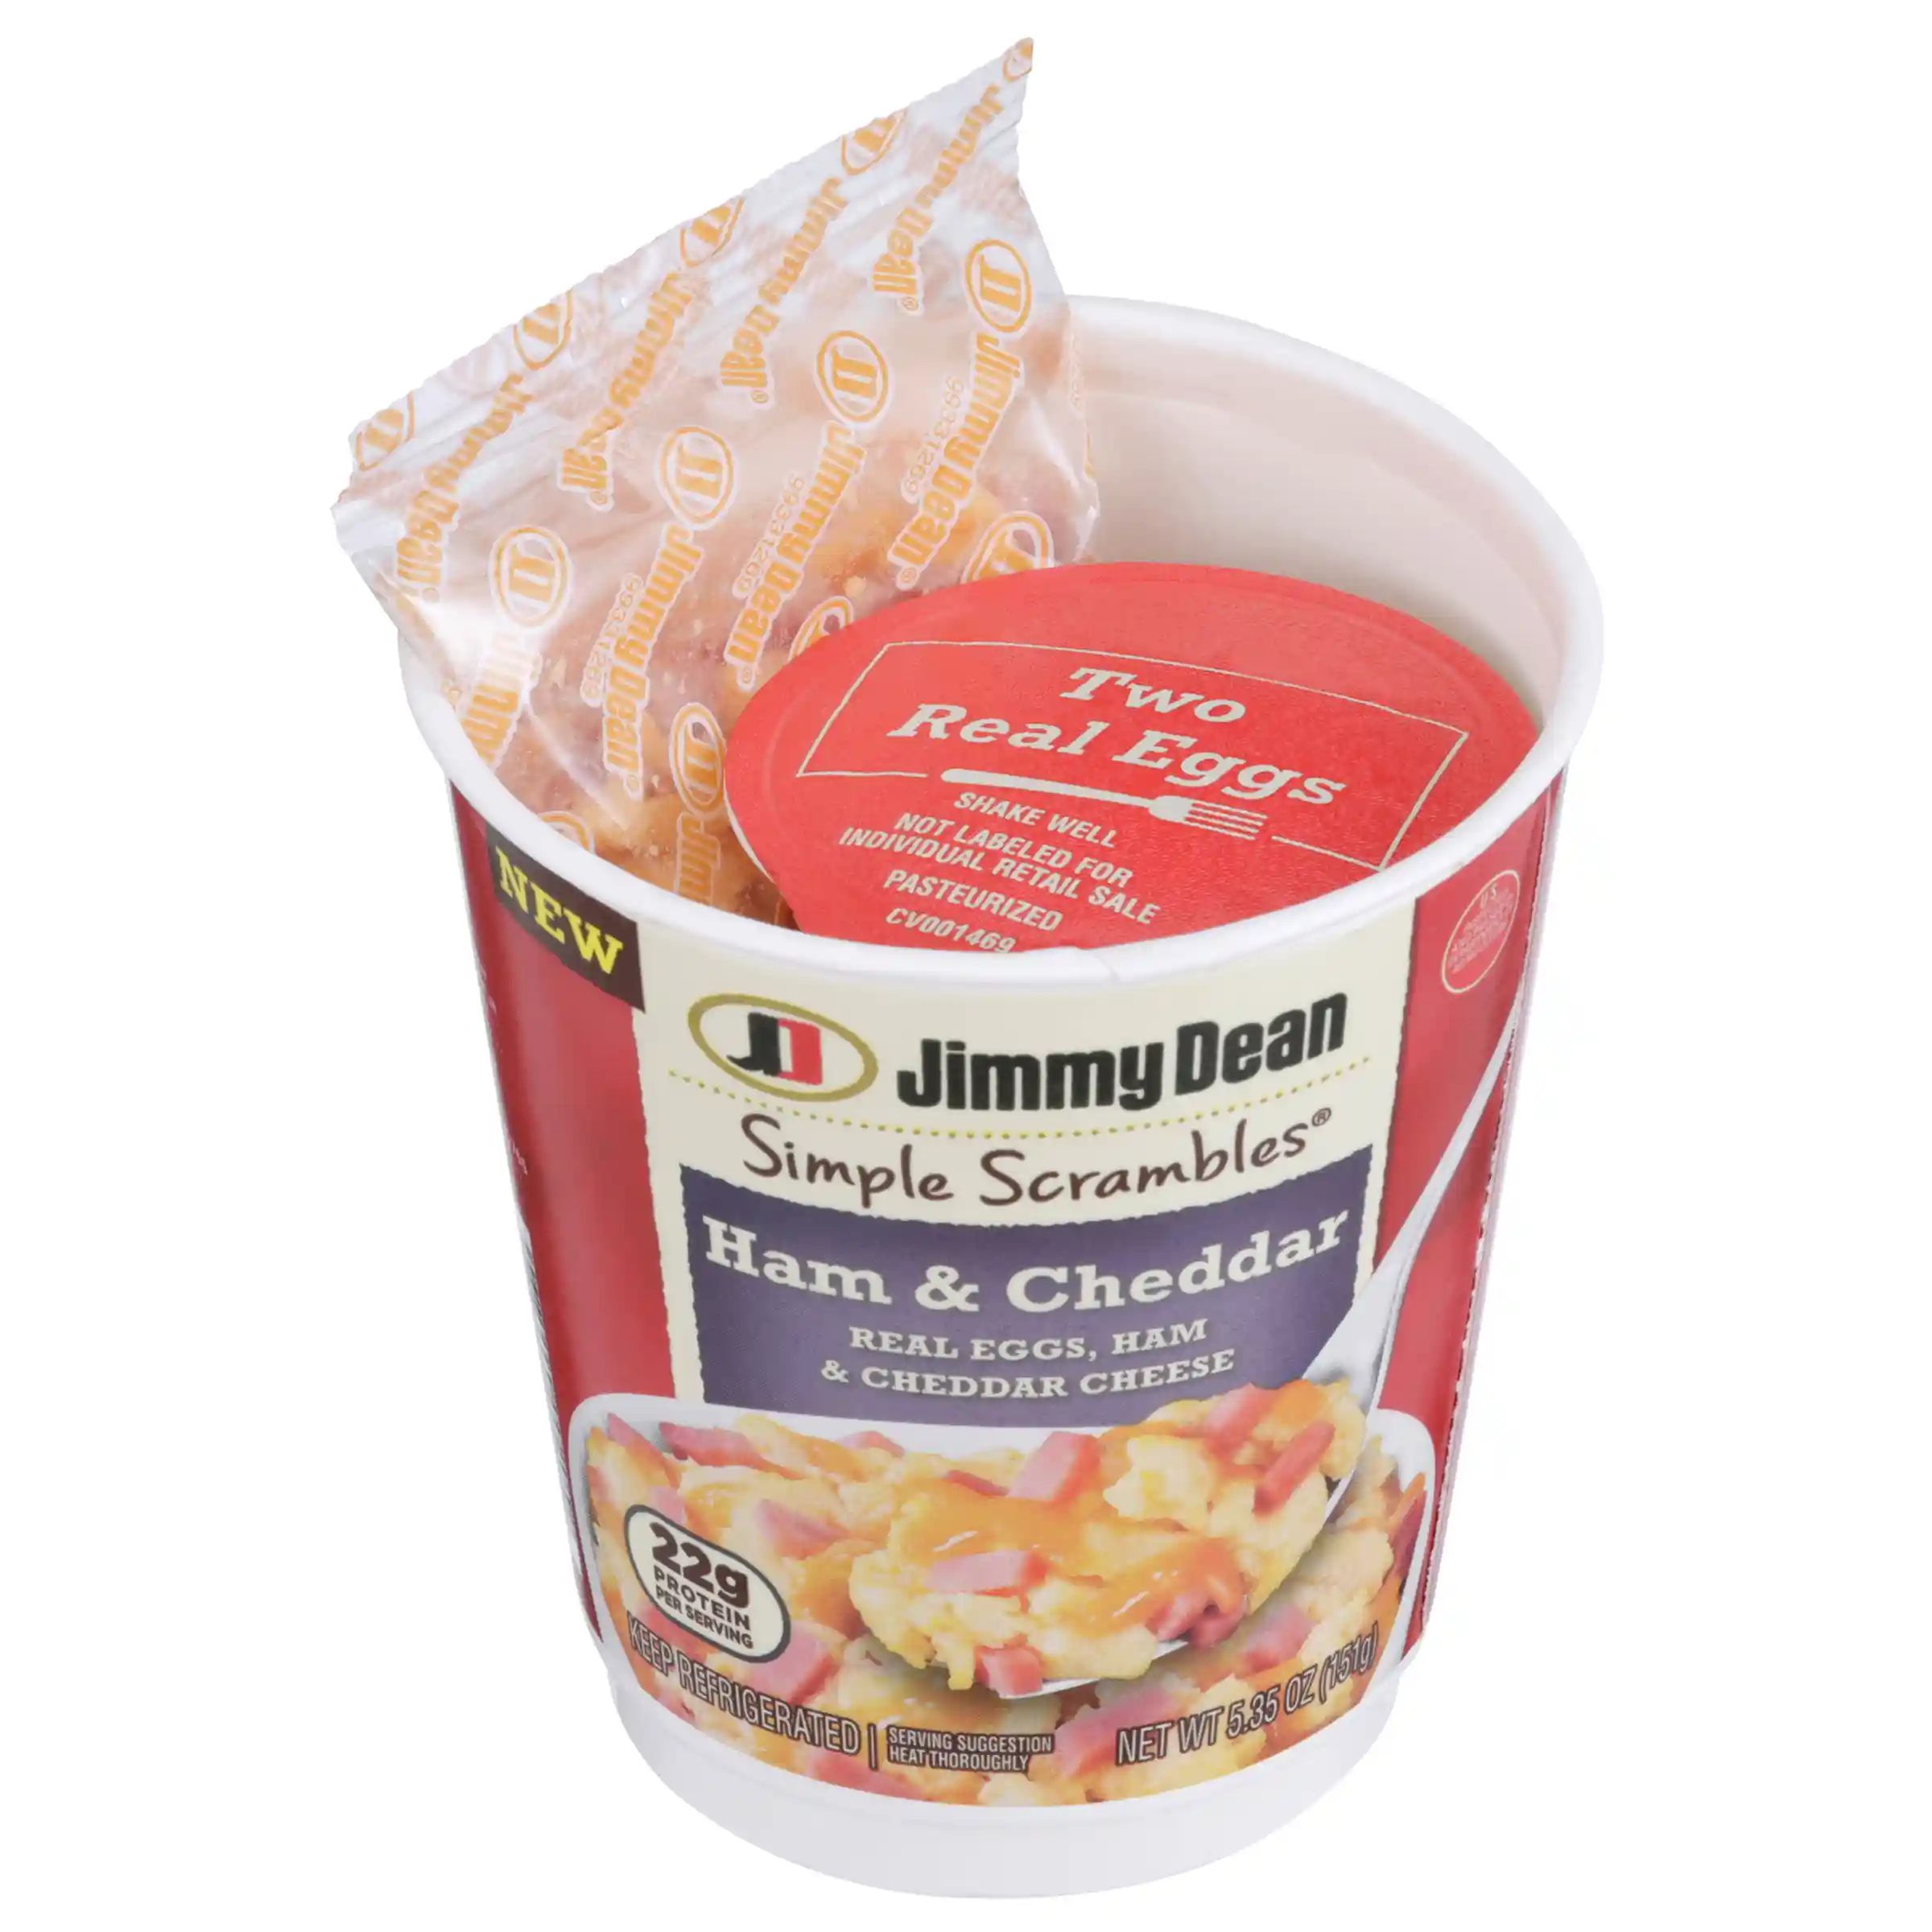 Jimmy Dean Simple Scrambles Ham & Cheddar with Real Eggs, Ham and Cheddar Cheese, 5.35 oz Cup_image_01